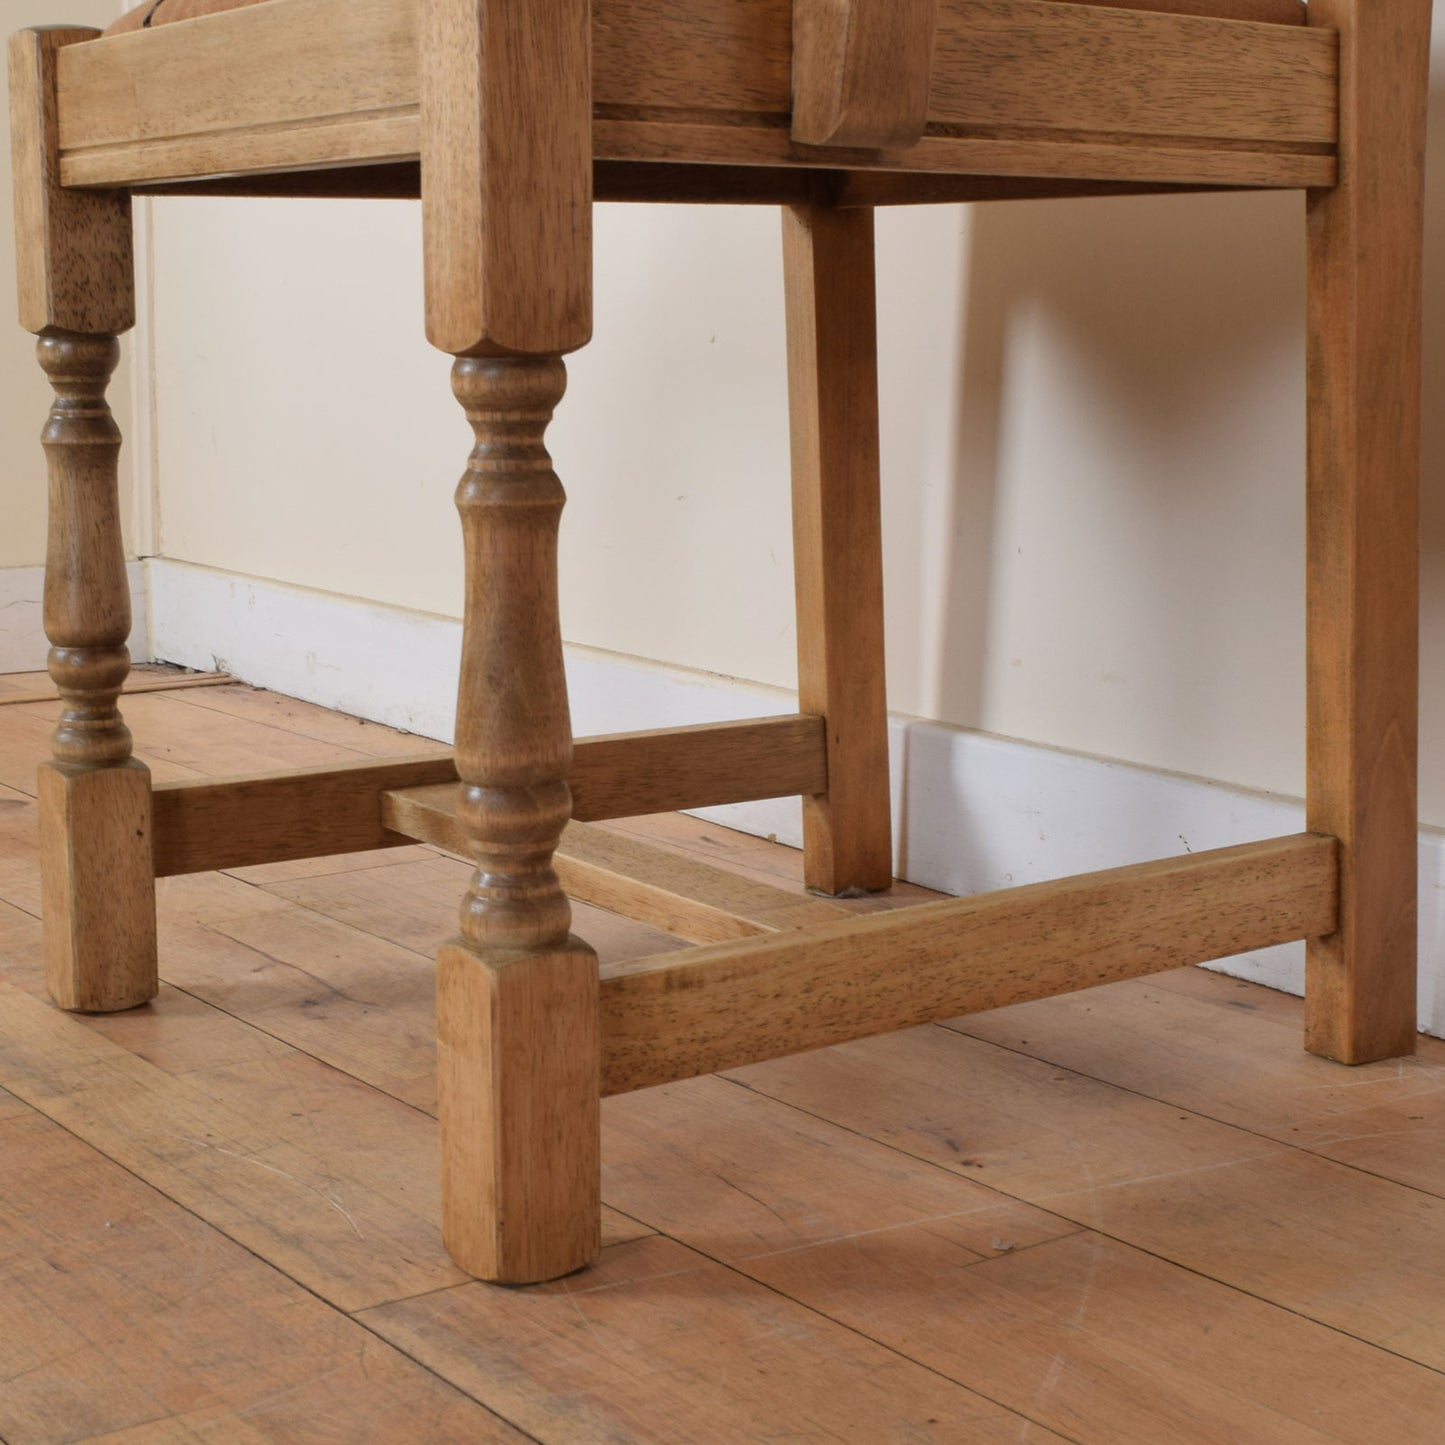 Extending Draw-Leaf Table and Six Chairs